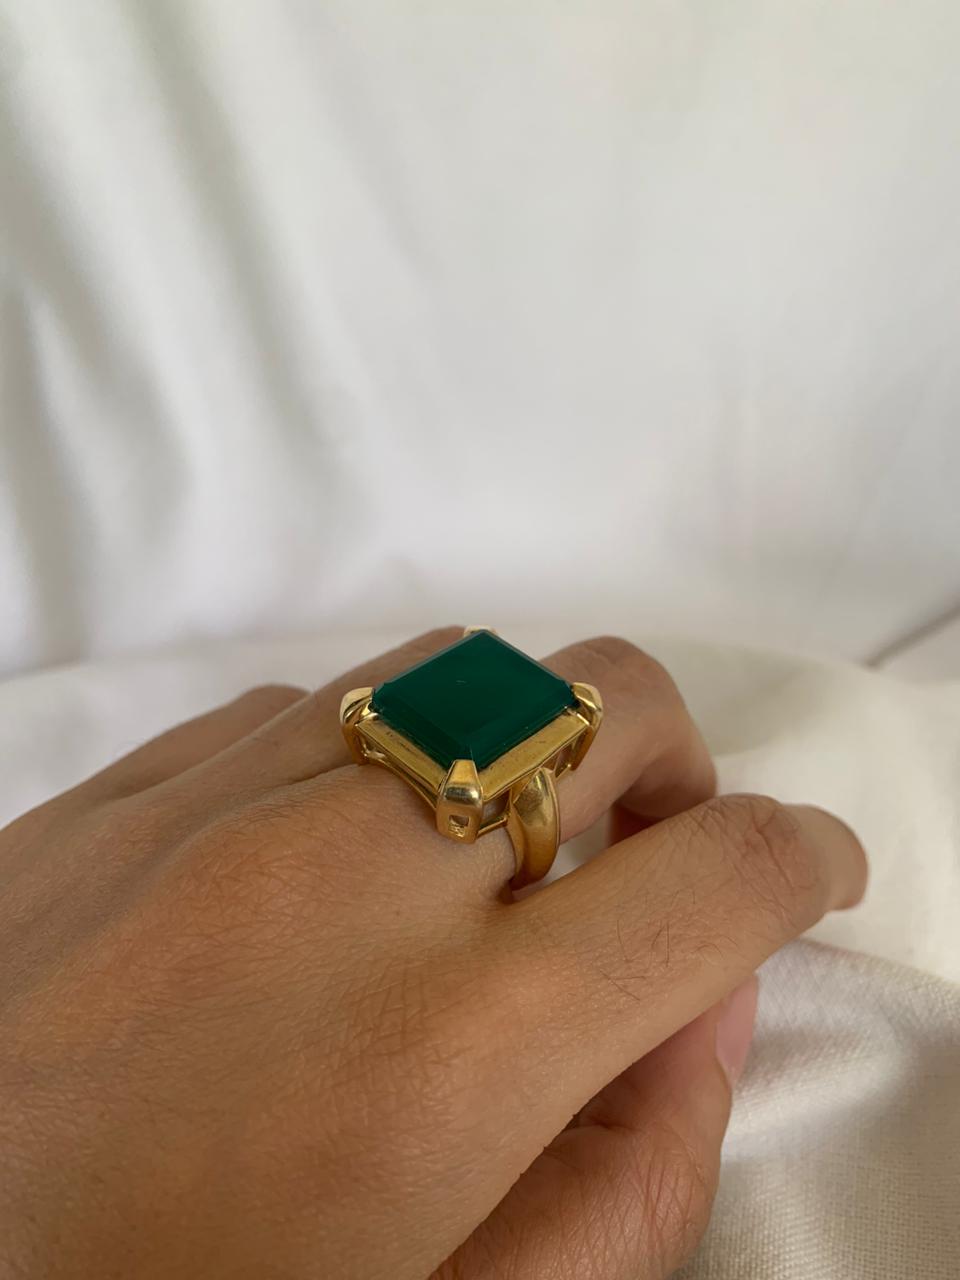 Unisex Modern 12mm Silver Emerald Gemstone Ring at Rs 2000 in Jaipur